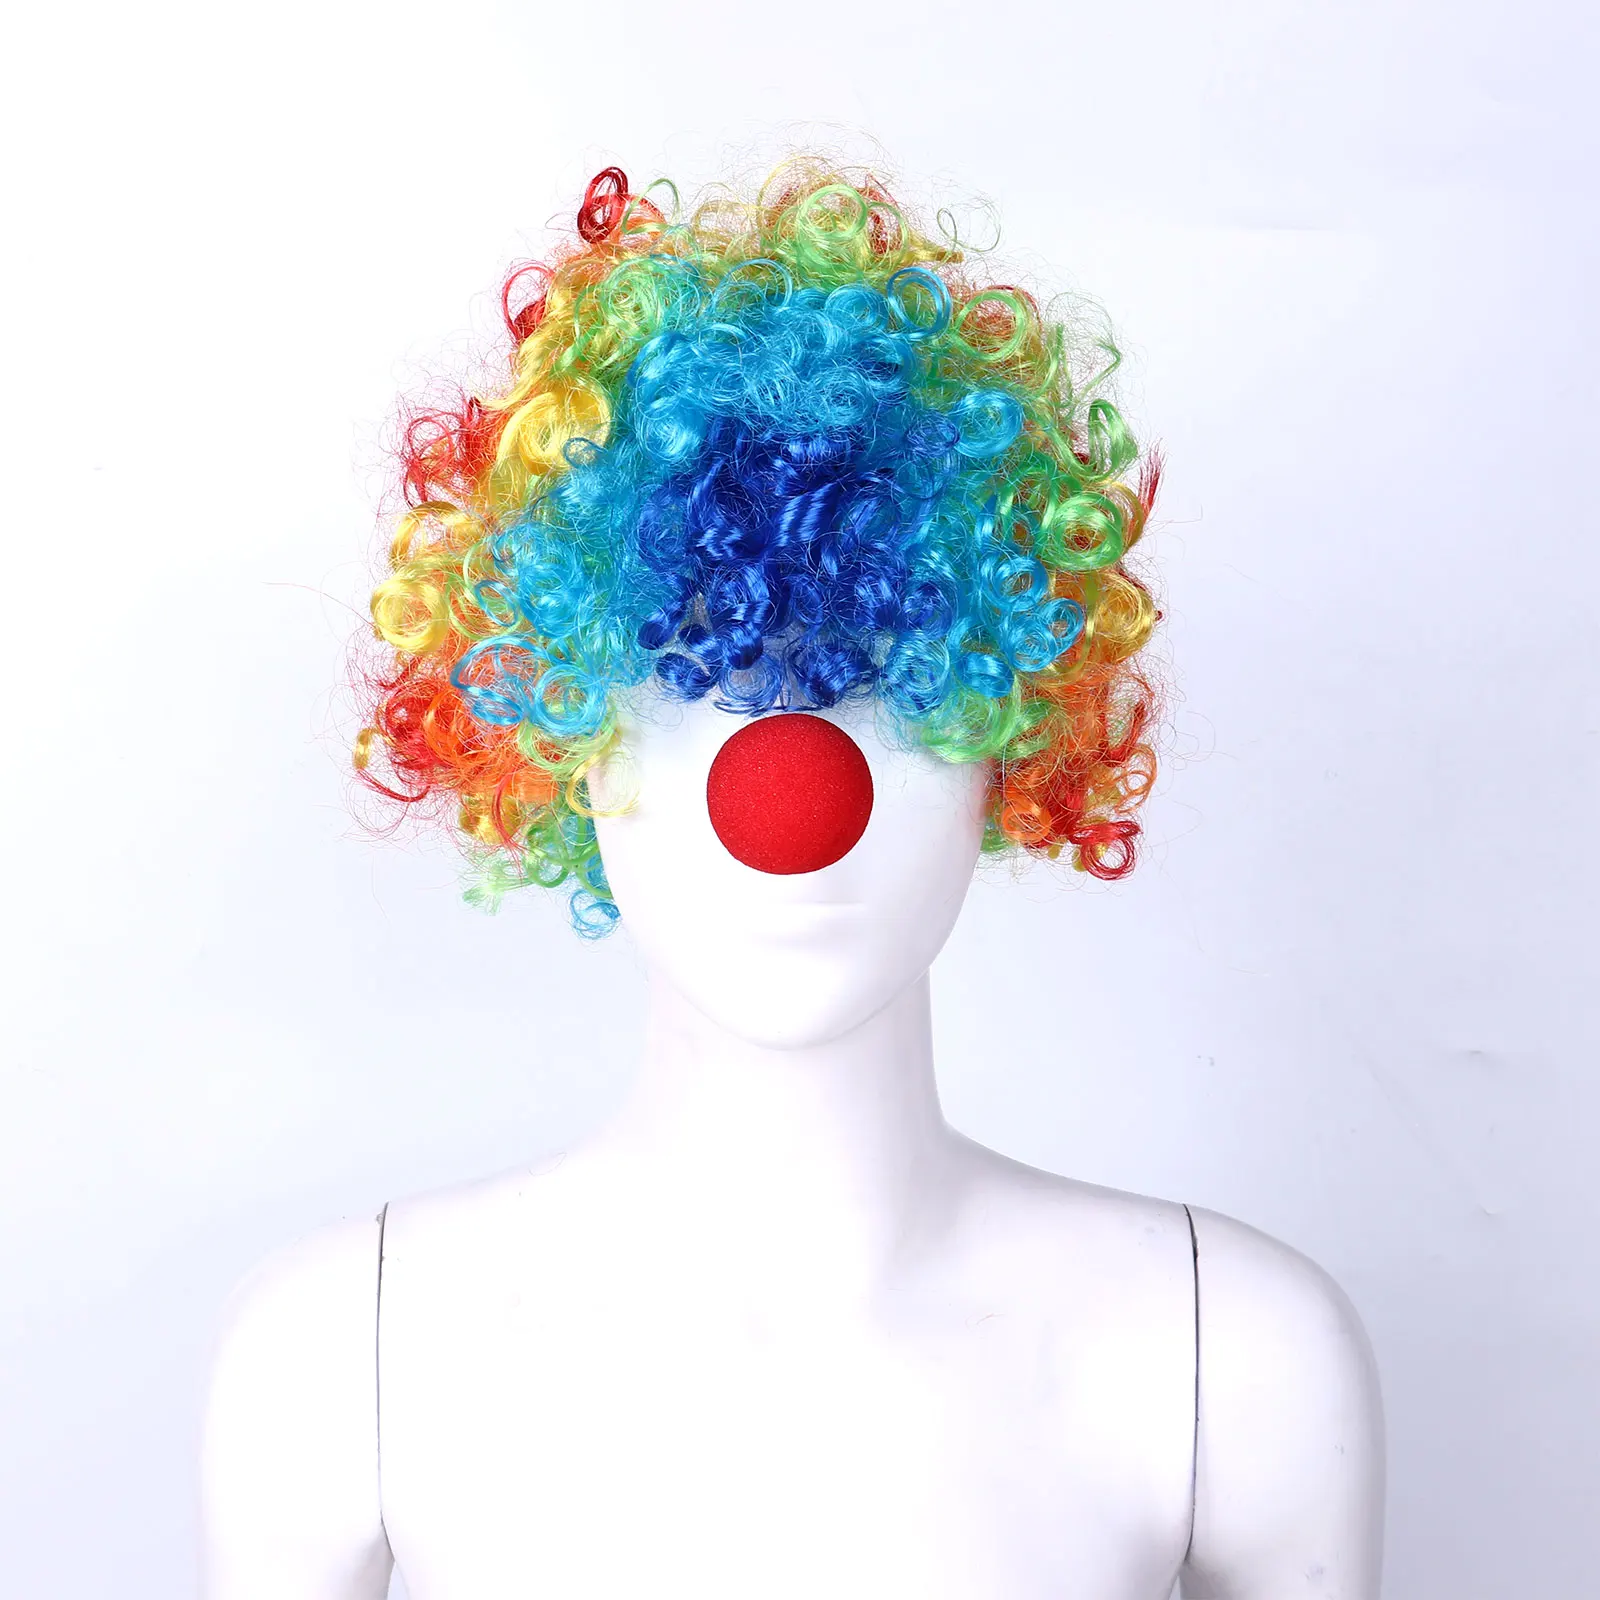 

Christmas Party Decorations Clown Dress Up Costume Set Fancy Buffoon Wig with Red Sponge Nose Rainbow Socks Funny Role Play Prop